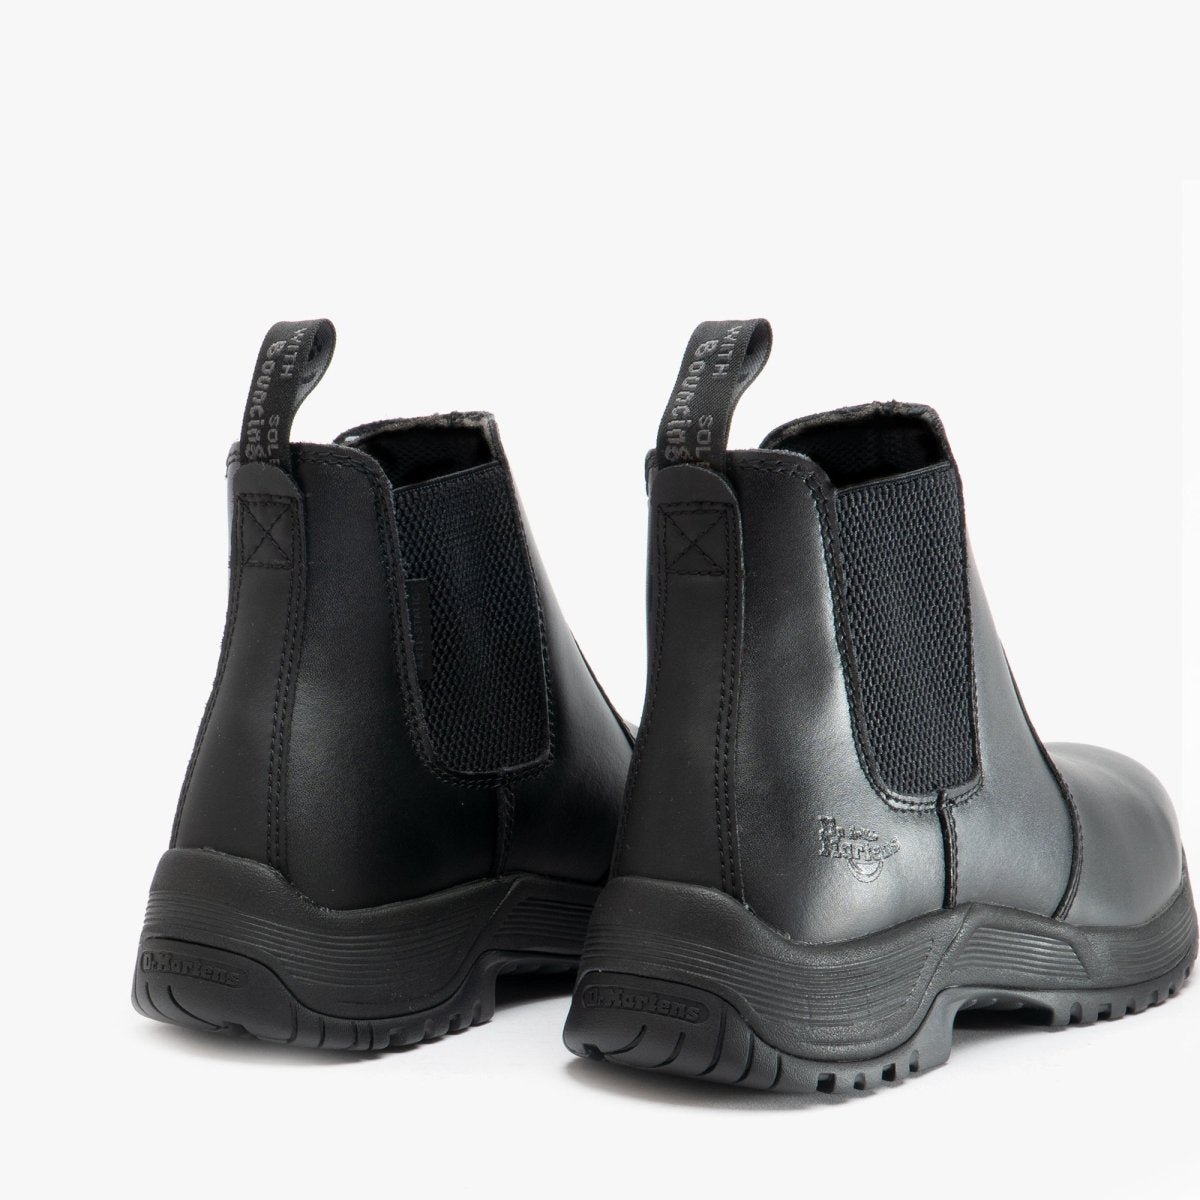 Dr Martens DRAKELOW Unisex Leather Safety Boots Black 26021 - 43390 - 01 | STB.co.uk